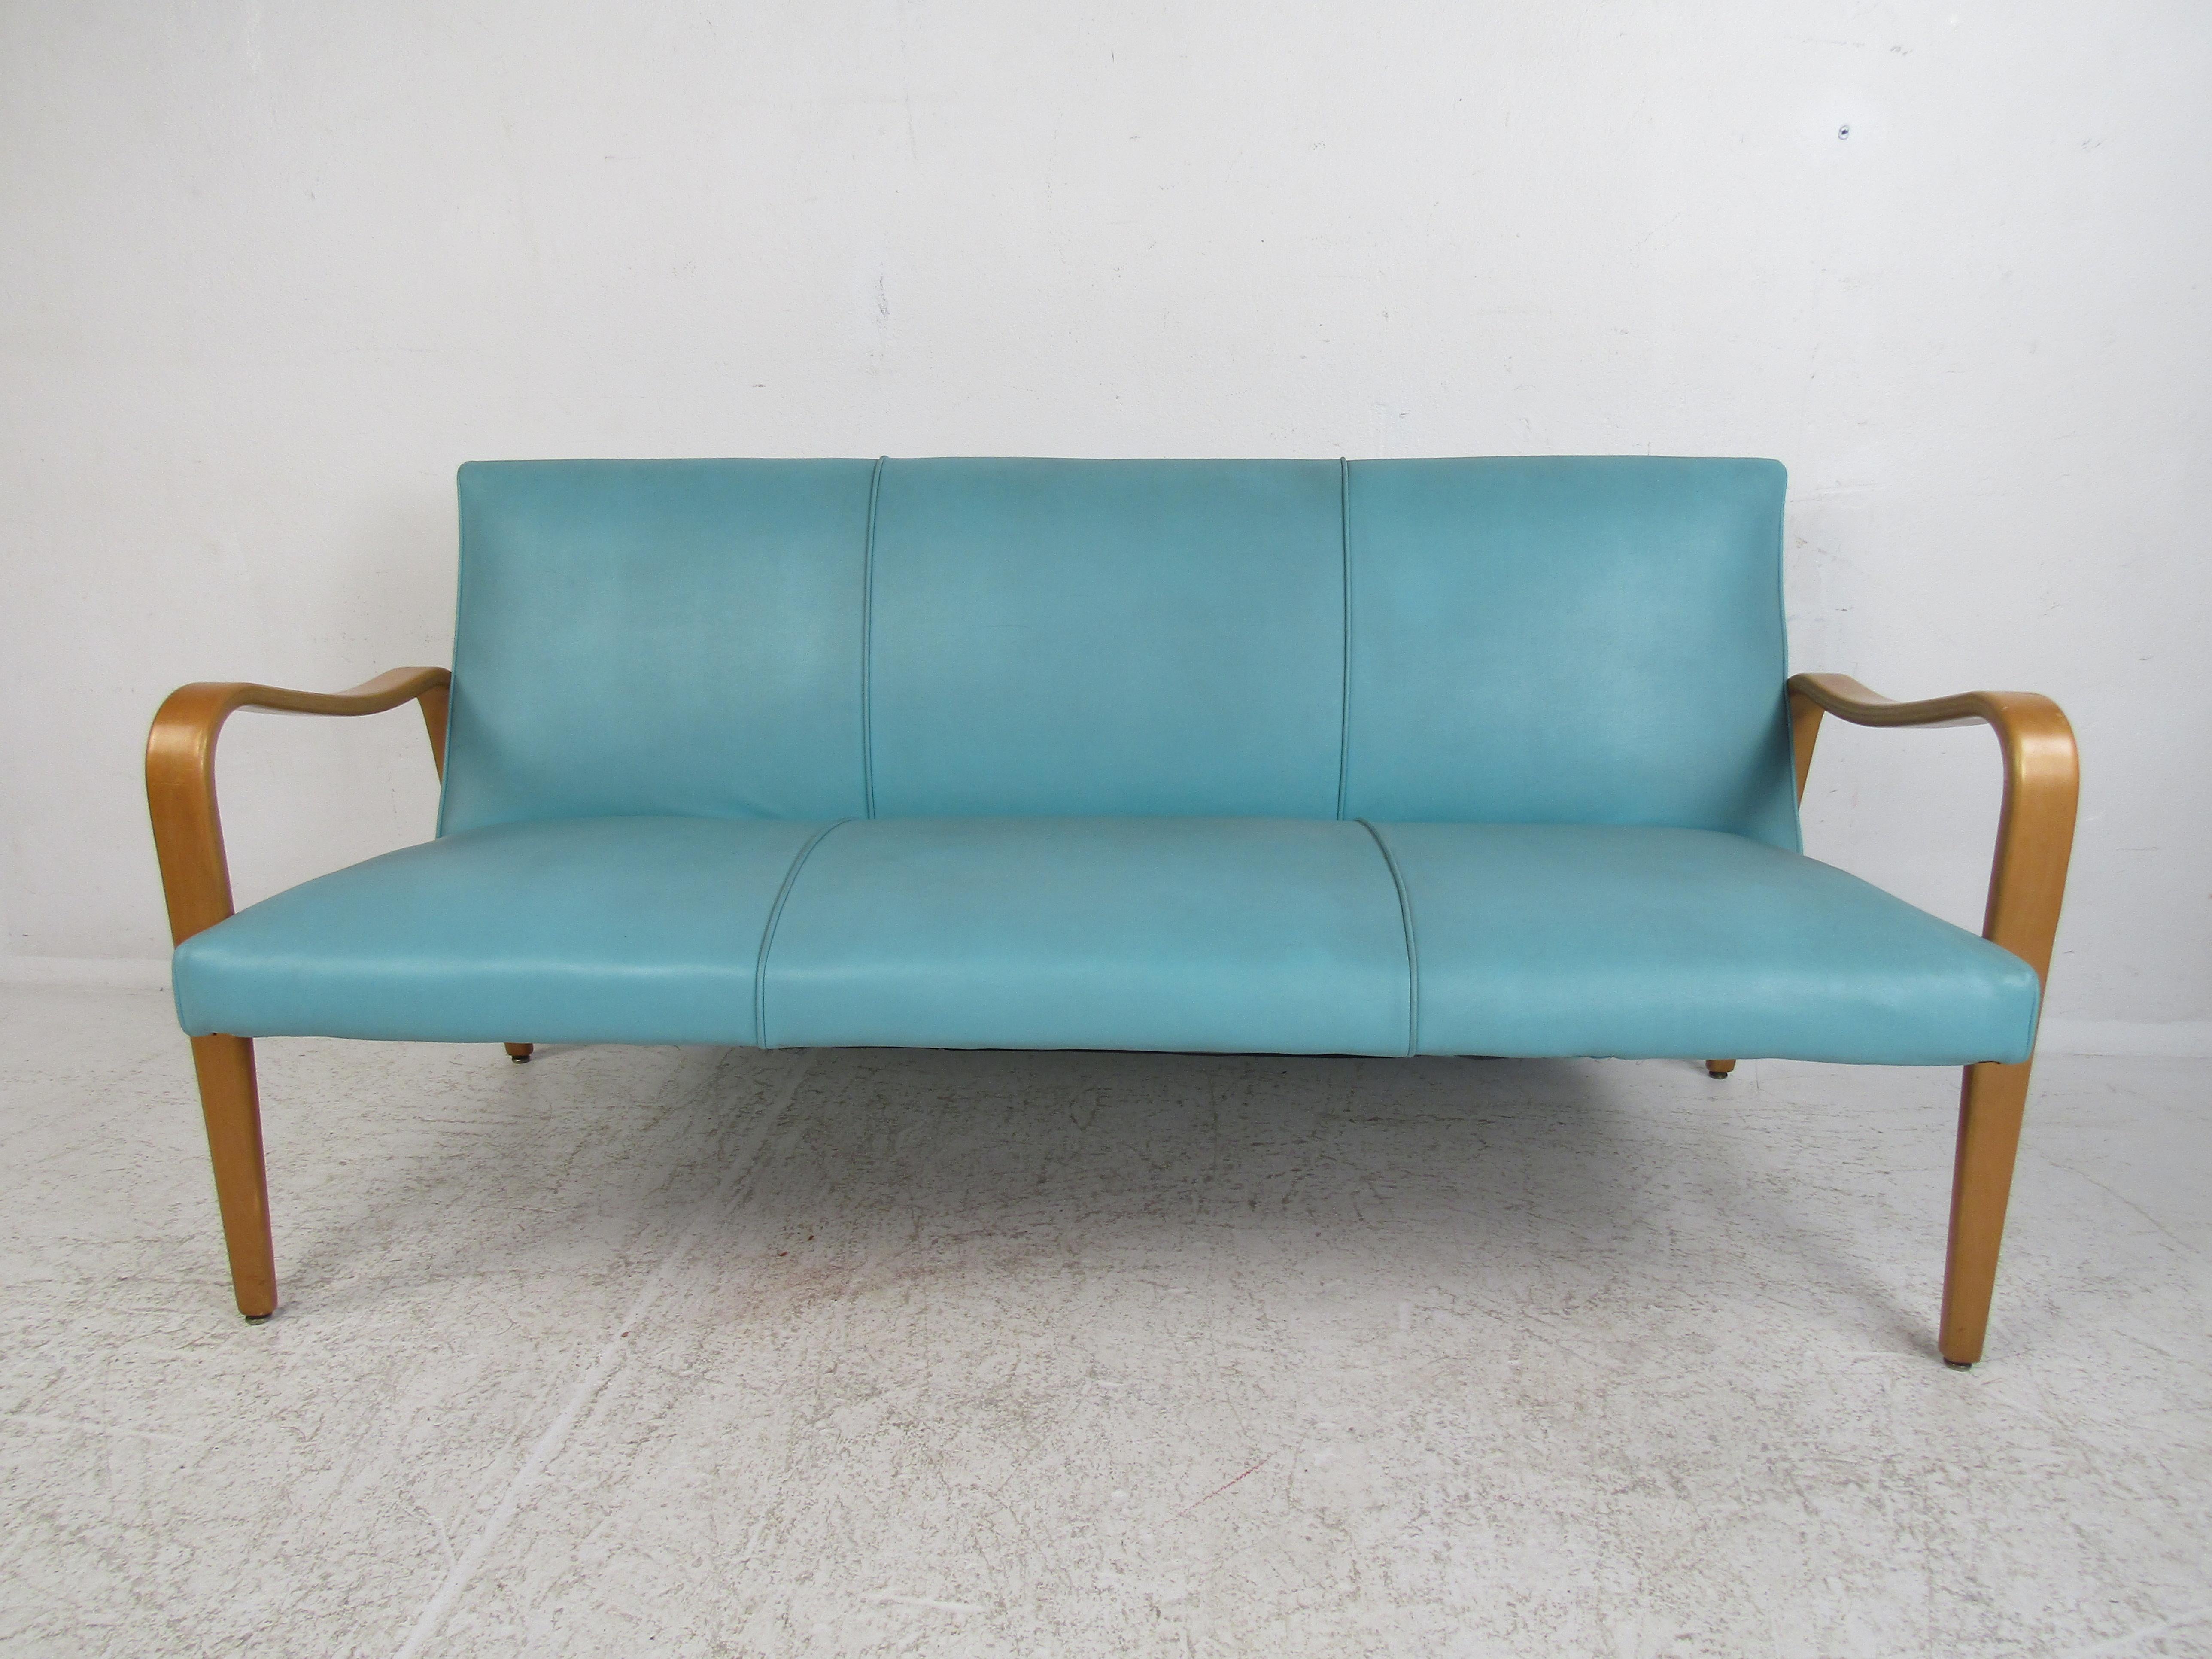 The unique shape of this Thonet style couch features a stylish modern design, eye-catching blue upholstery, and beautiful bentwood armrests. Comfortable seats make this piece a unique addition to any home, business, or office. Please confirm item